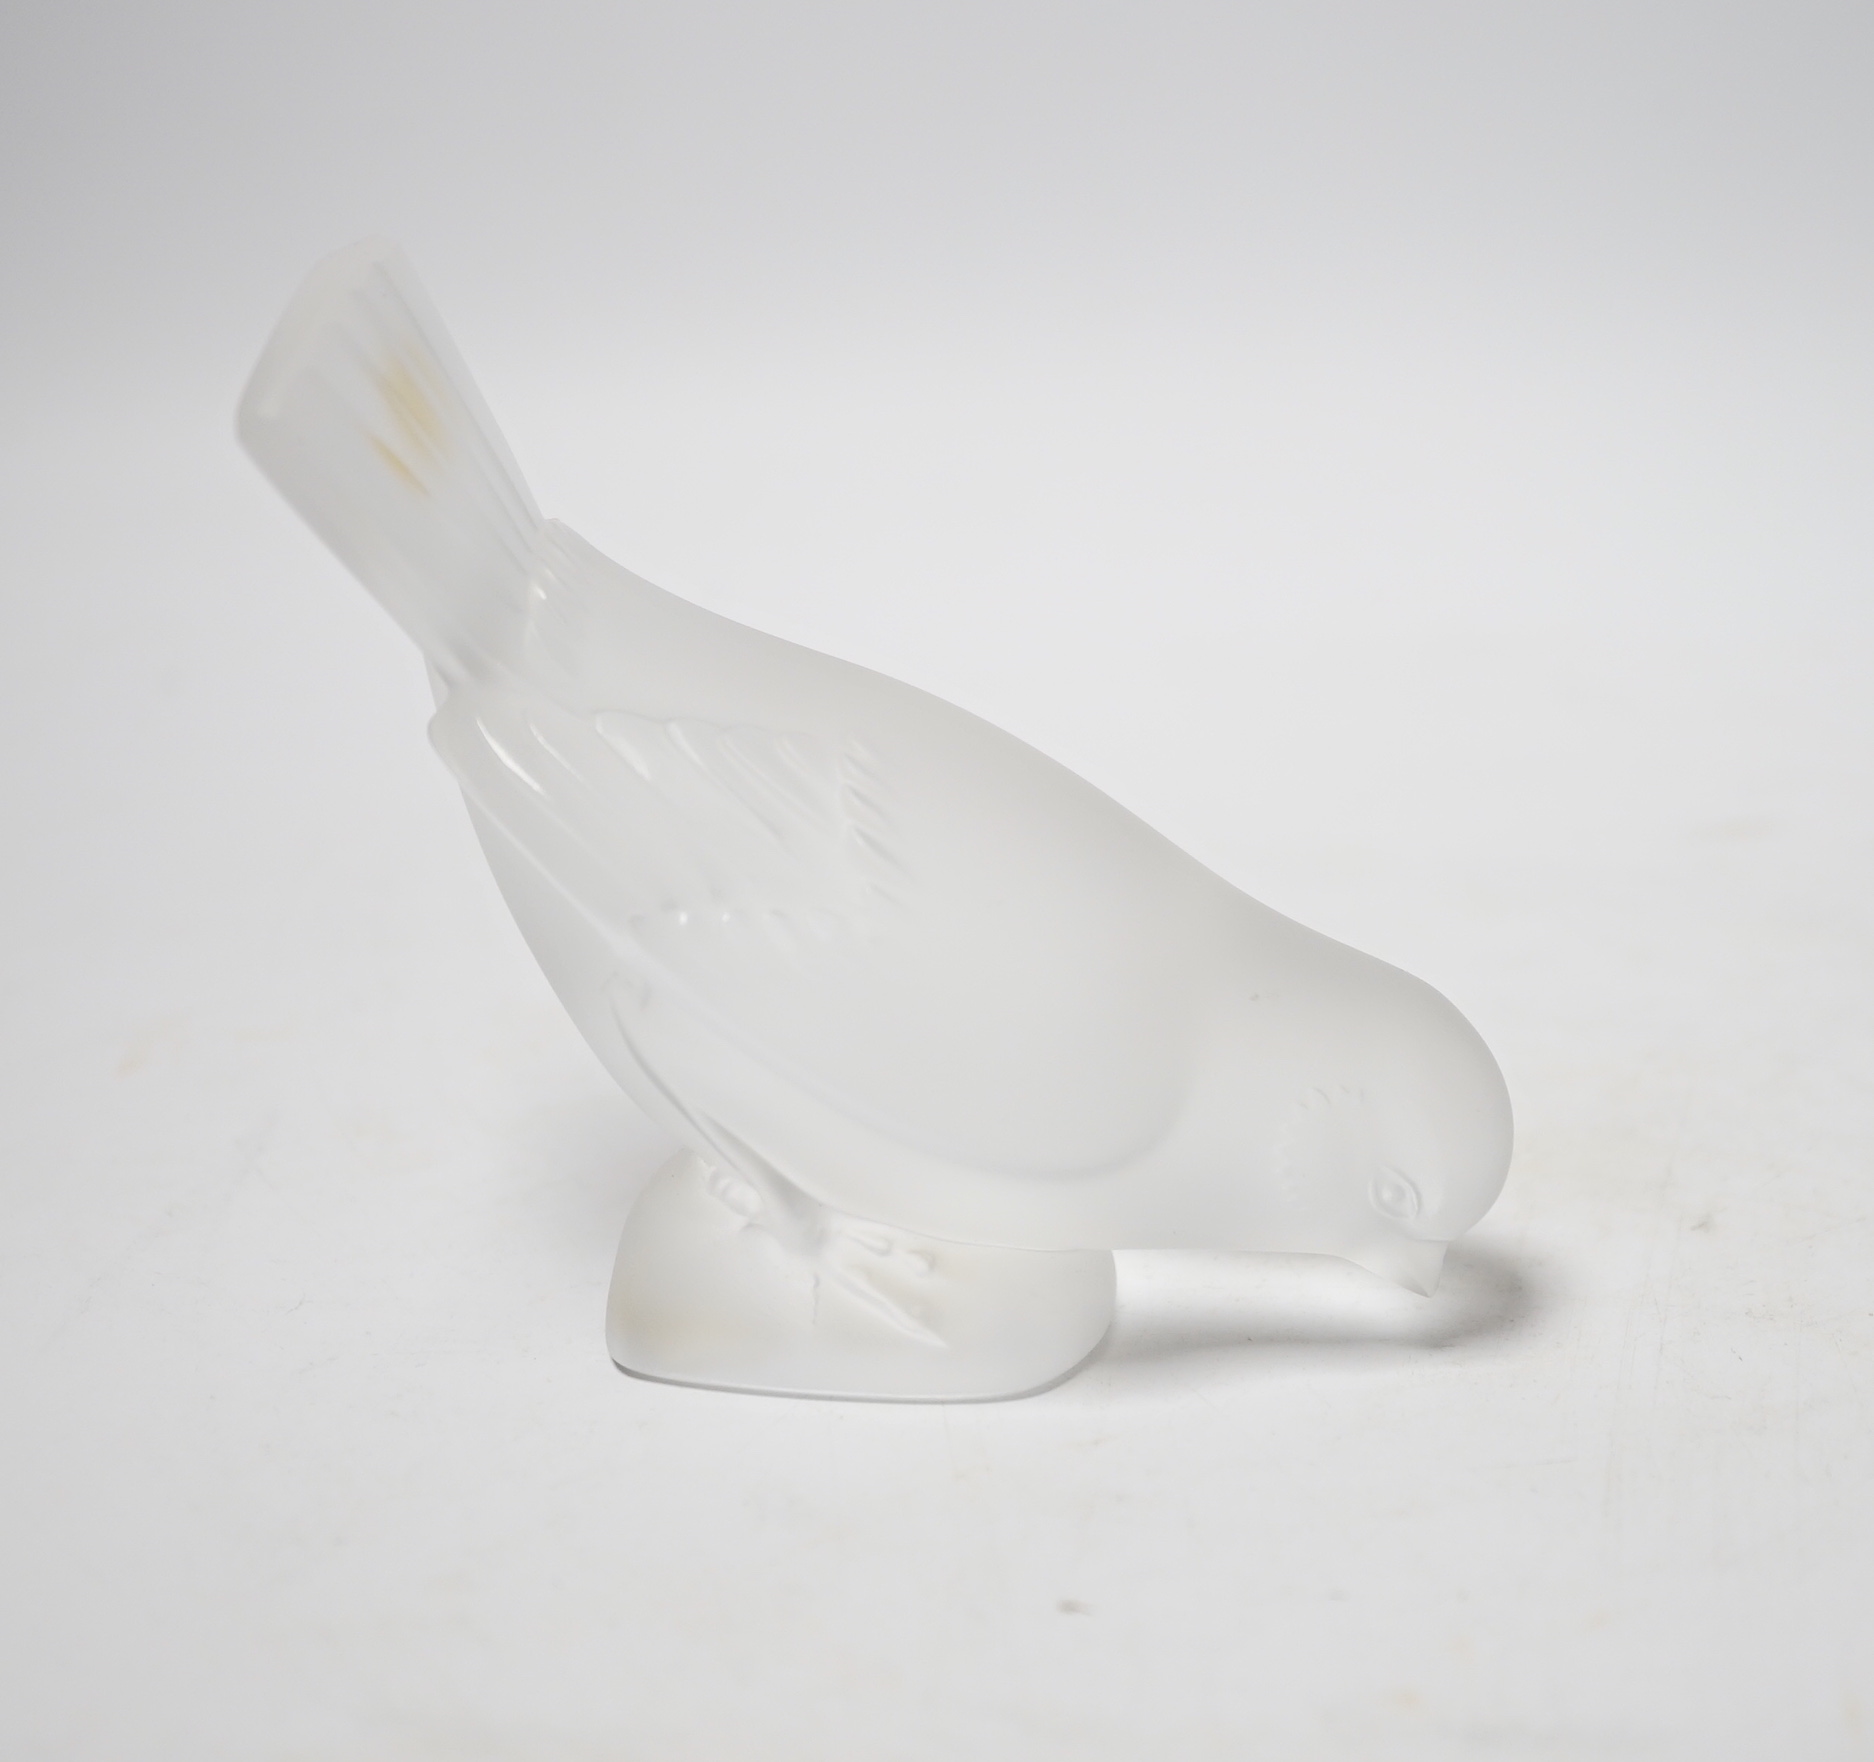 A modern Lalique frosted glass model of a bird, 10cm tall                                                                                                                                                                   